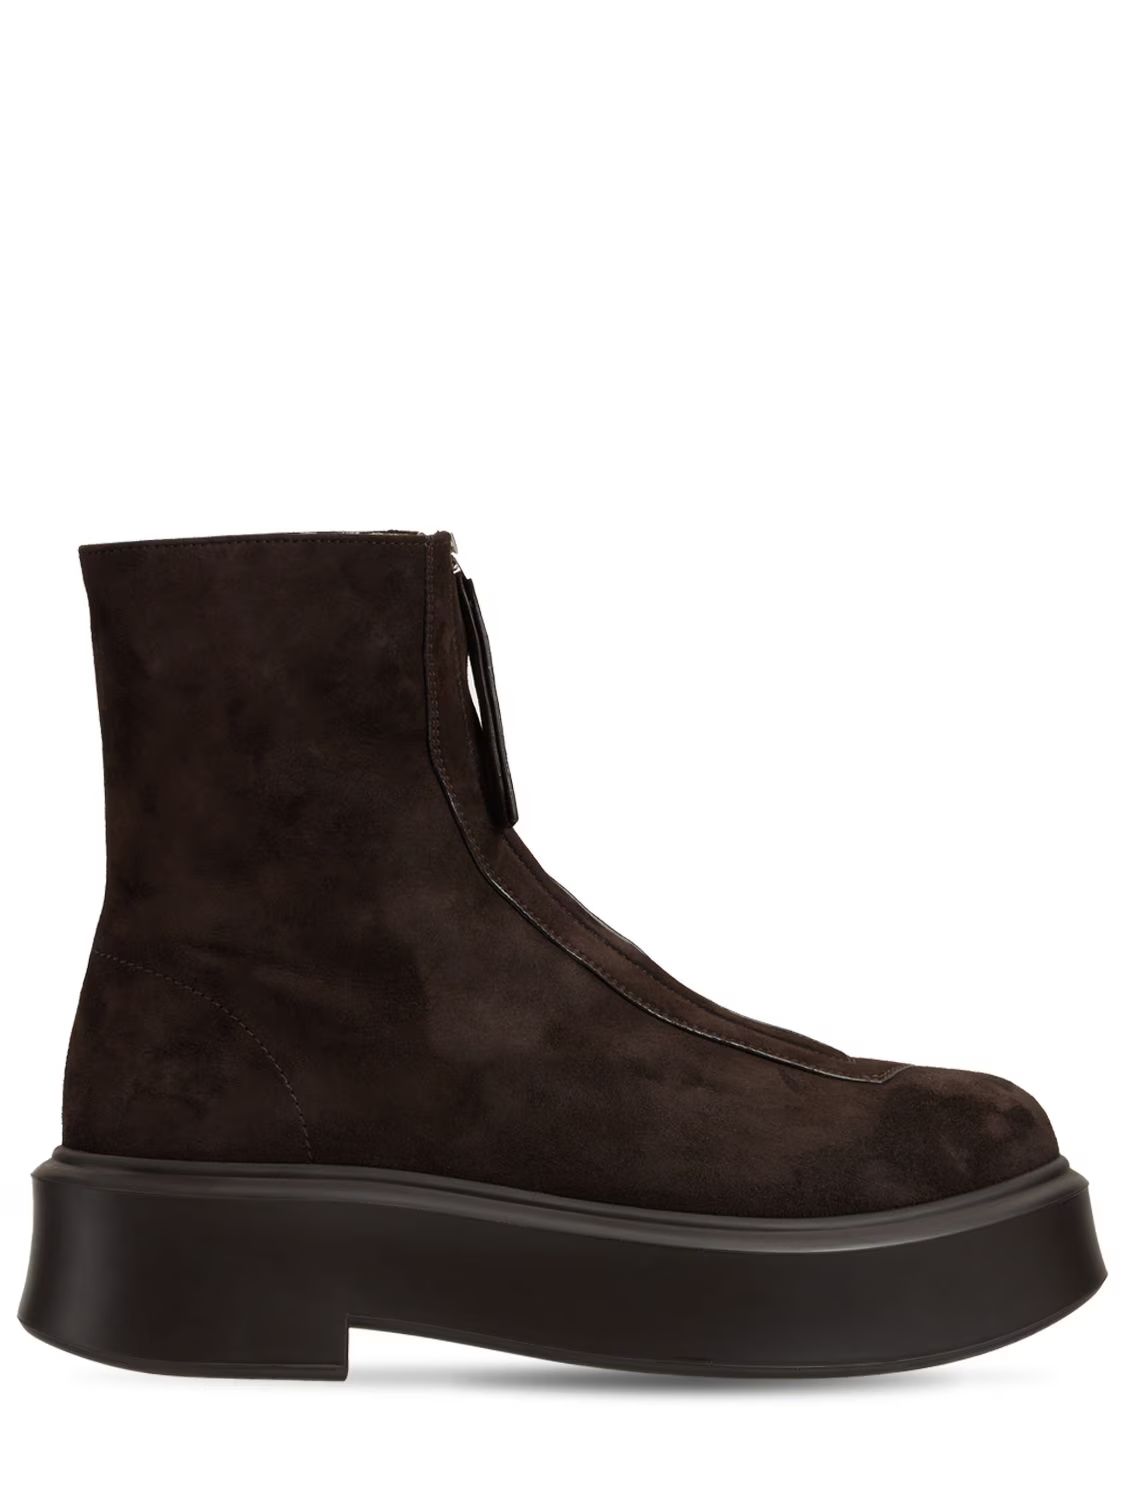 50mm Suede Ankle Boots | Luisaviaroma